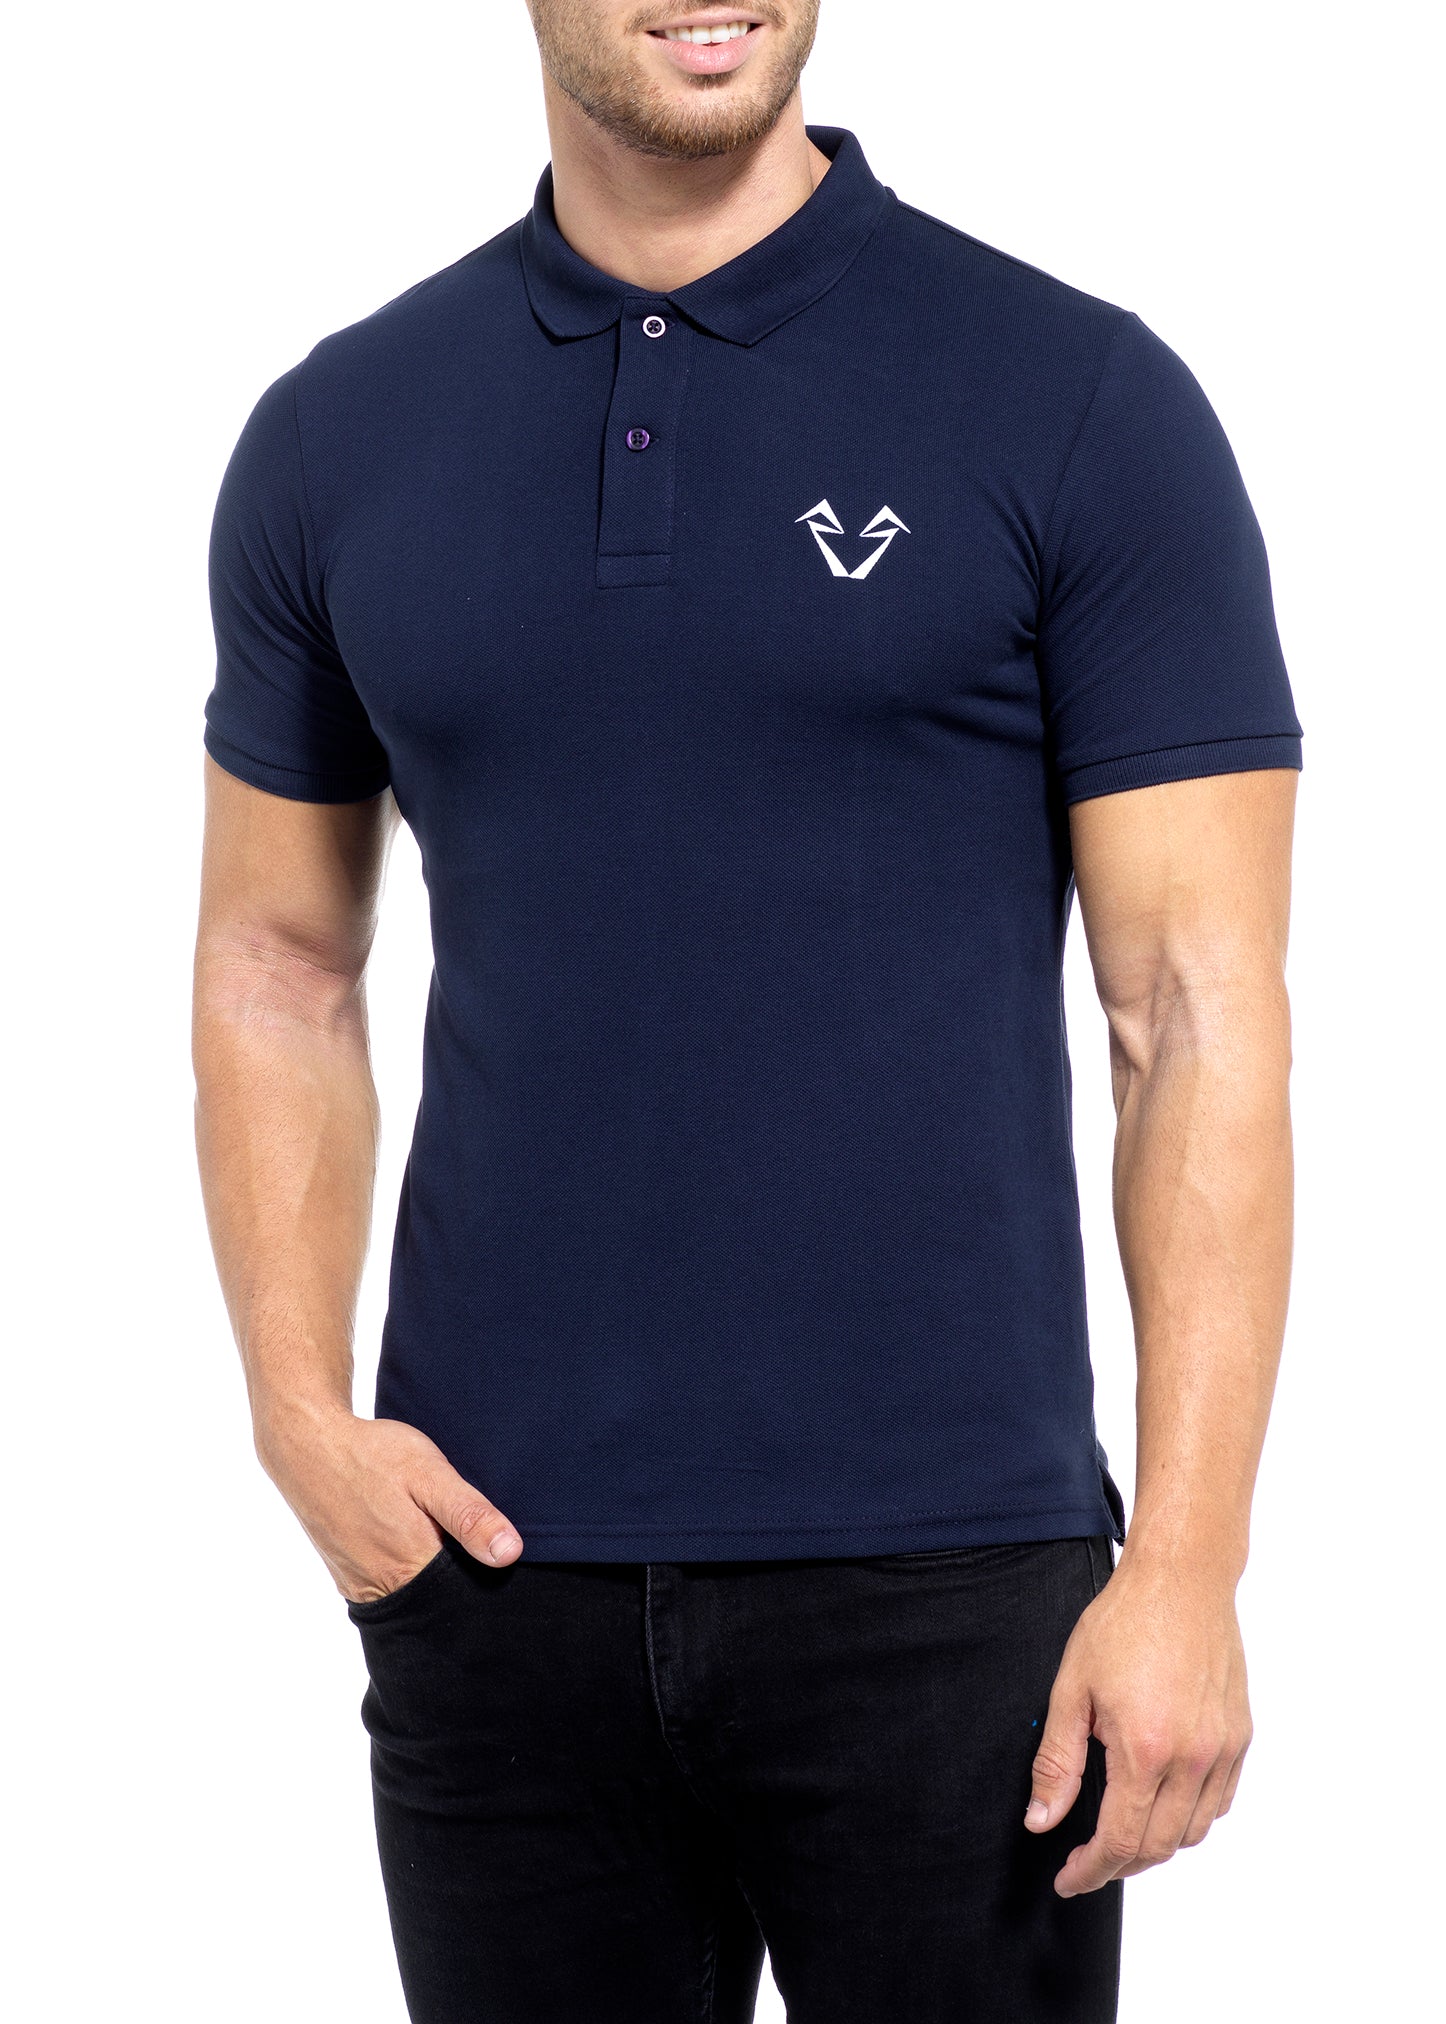 Mens Muscle Fit Navy Polo Shirts